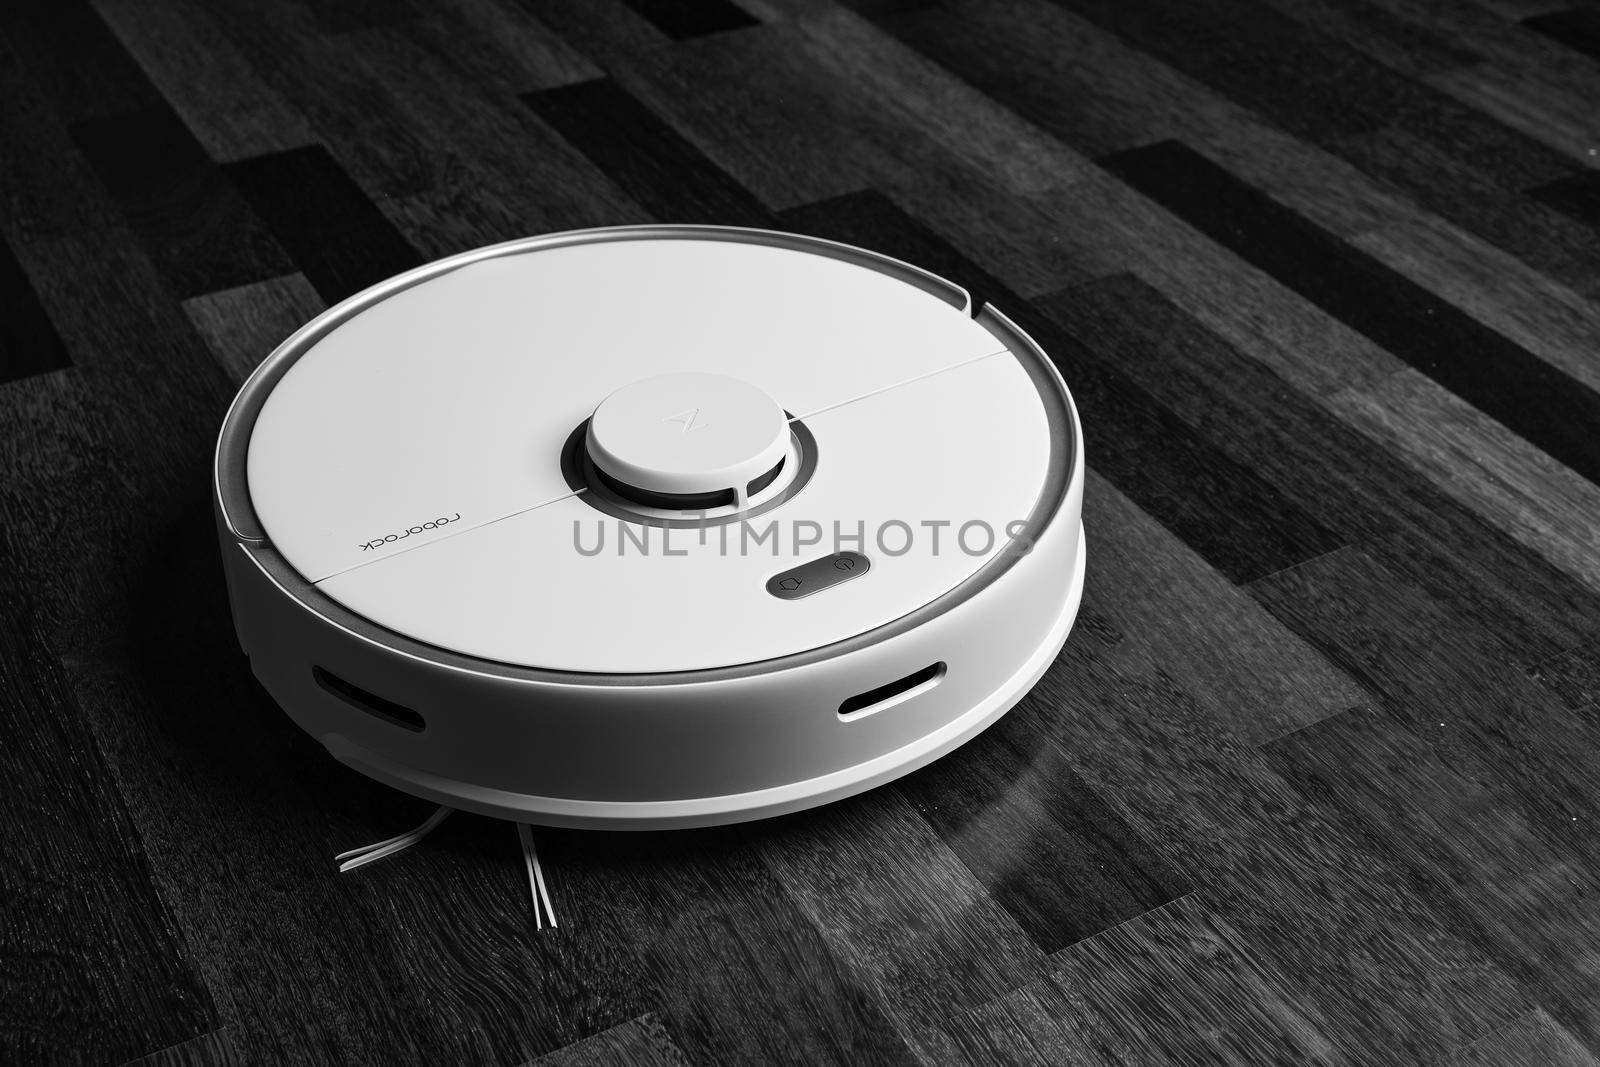 Smart Robot Vacuum Cleaner Xiaomi roborock s5 max on wood floor. Robot vacuum cleaner performs automatic cleaning of the apartment. 04.12.2020, Rostov region, Russia by EvgeniyQW